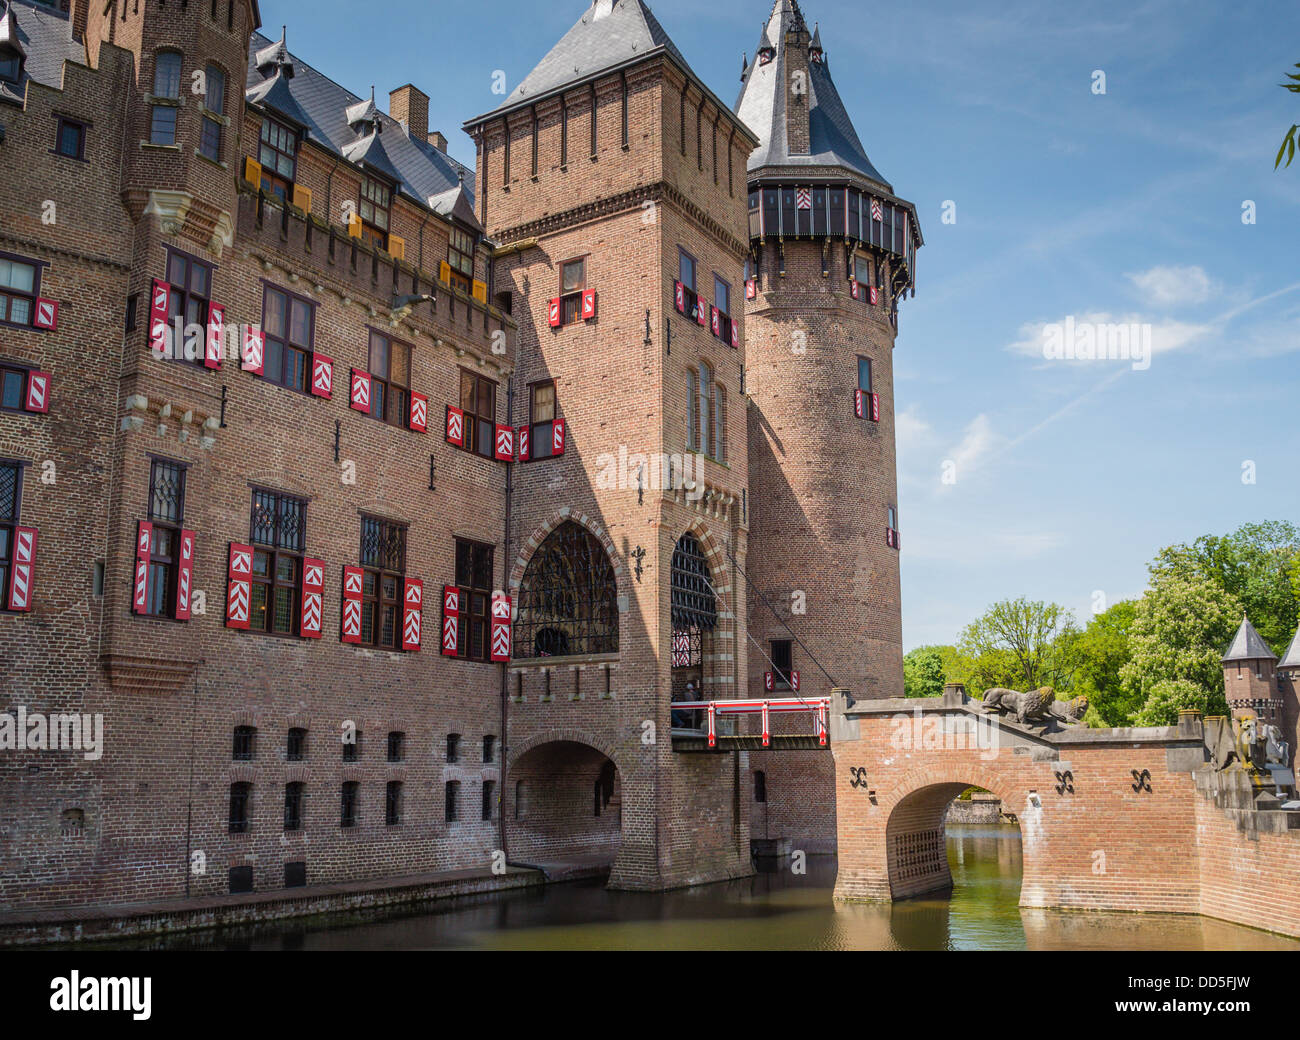 Castle De Haar, The Netherlands is a medieval fortress with towers, ramparts, canals and drawbridges Stock Photo